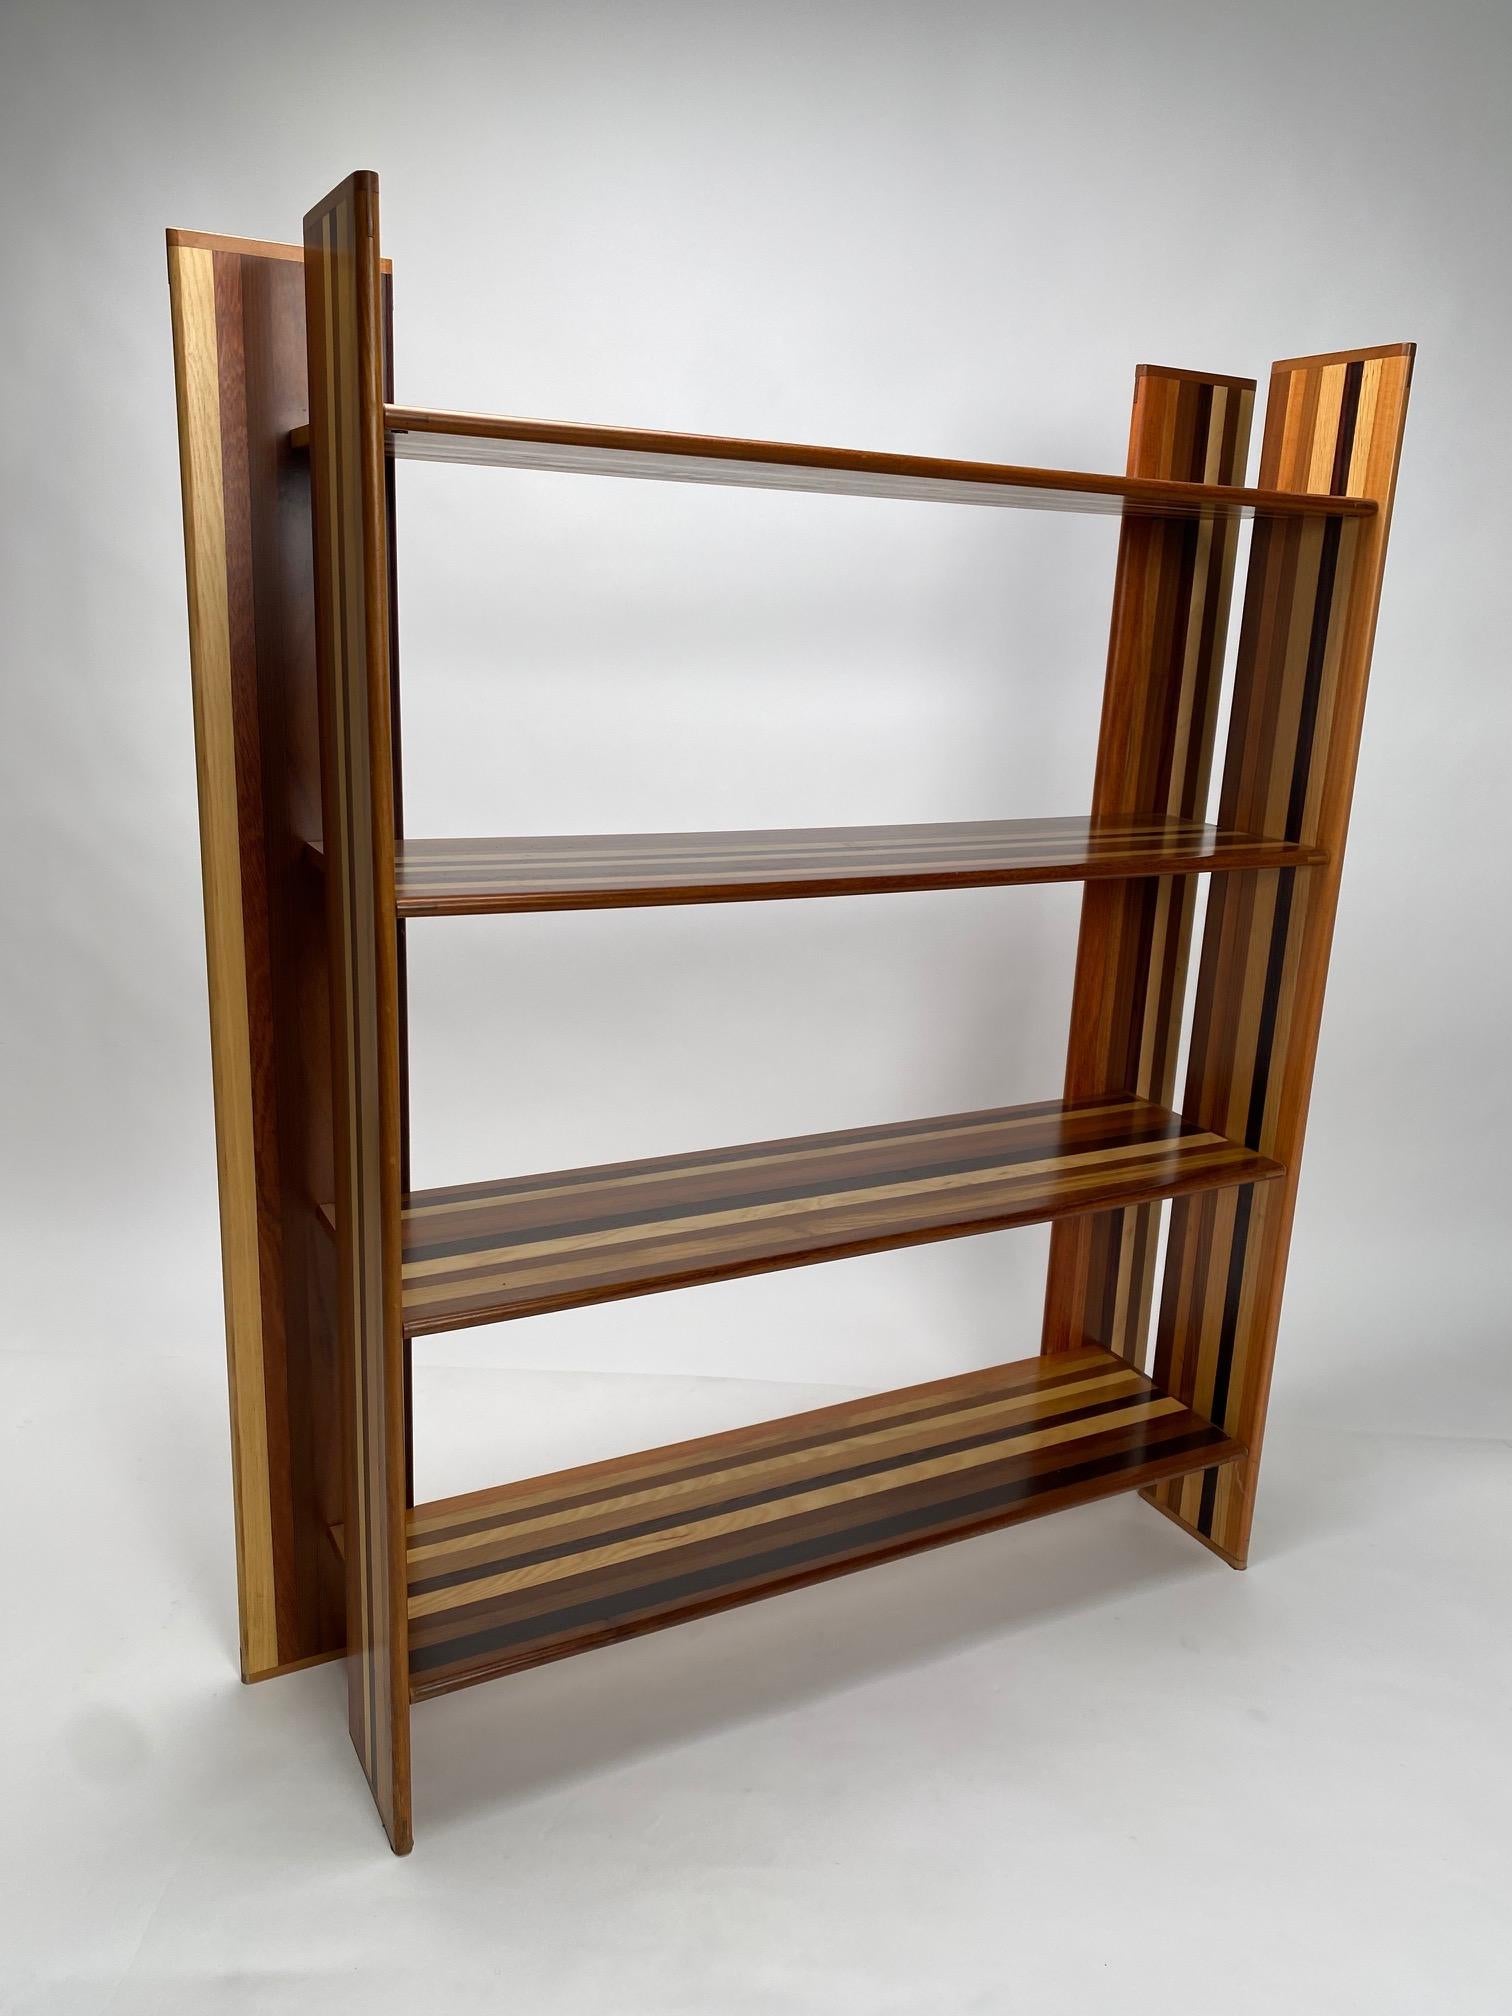 Late 20th Century MOP Modular Bookcase by AFRA & TOBIA SCARPA, Molteni, Italy 1974 For Sale